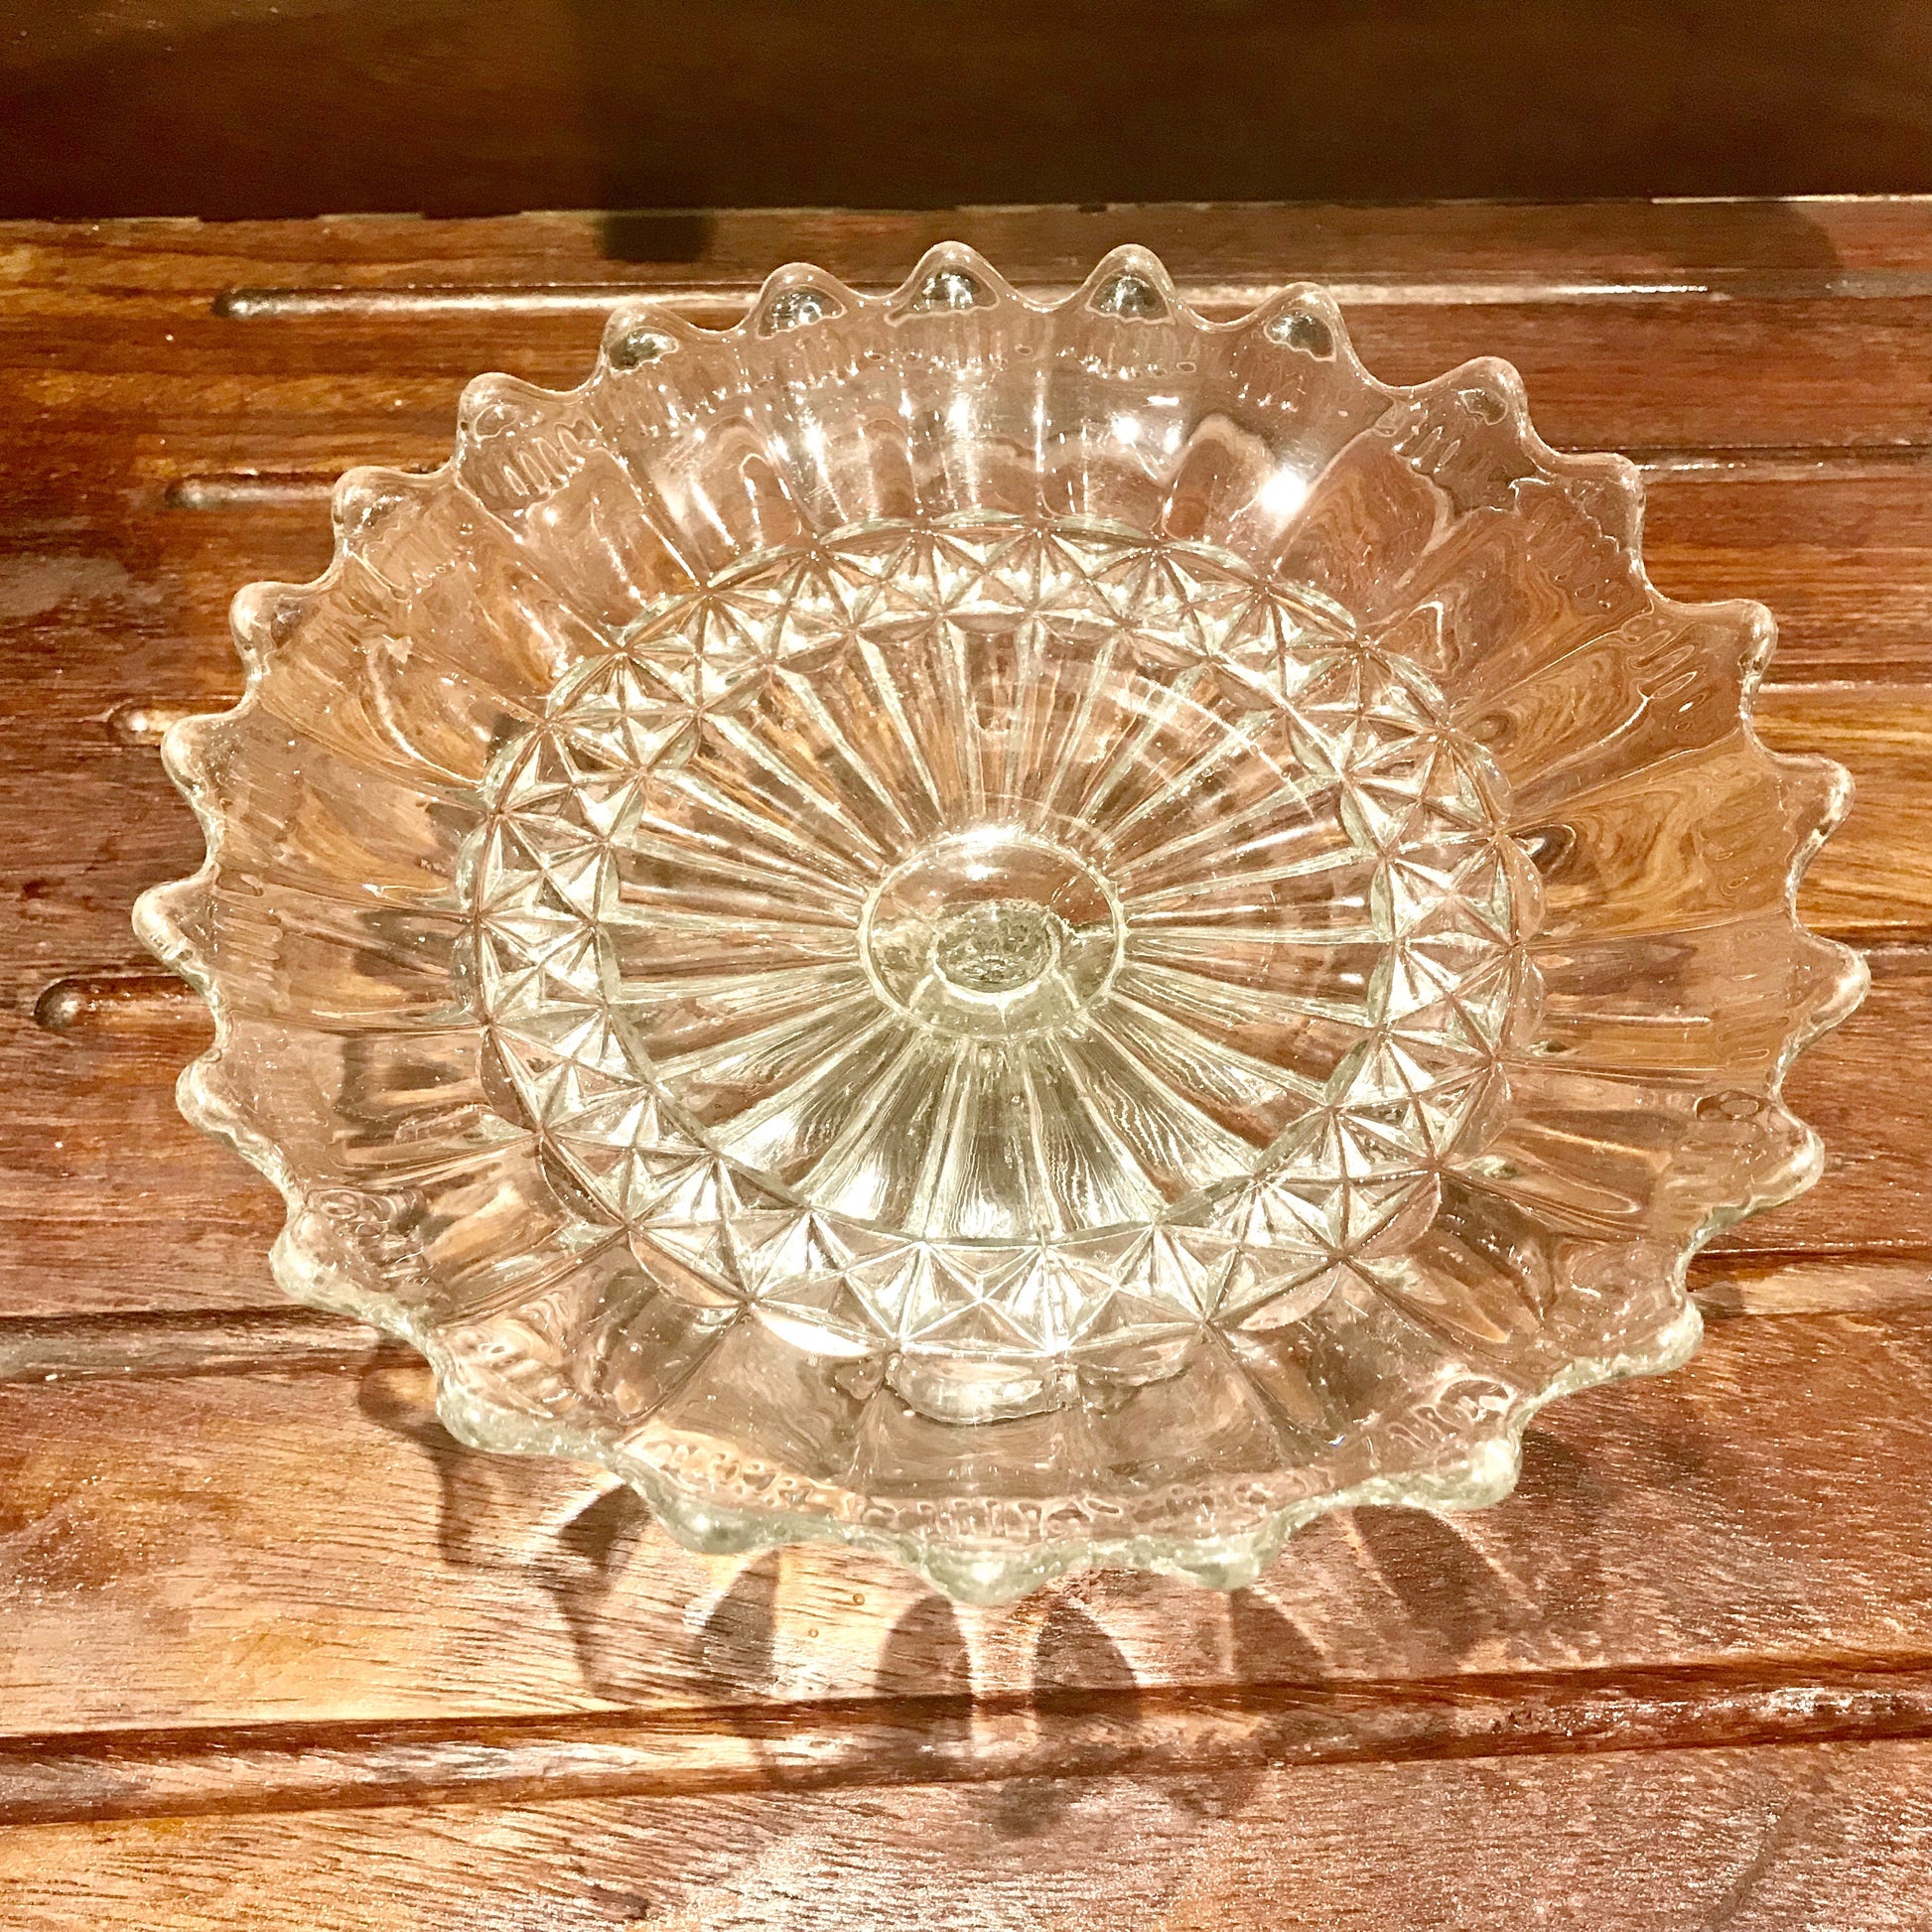 early english pressed glass fruit stand